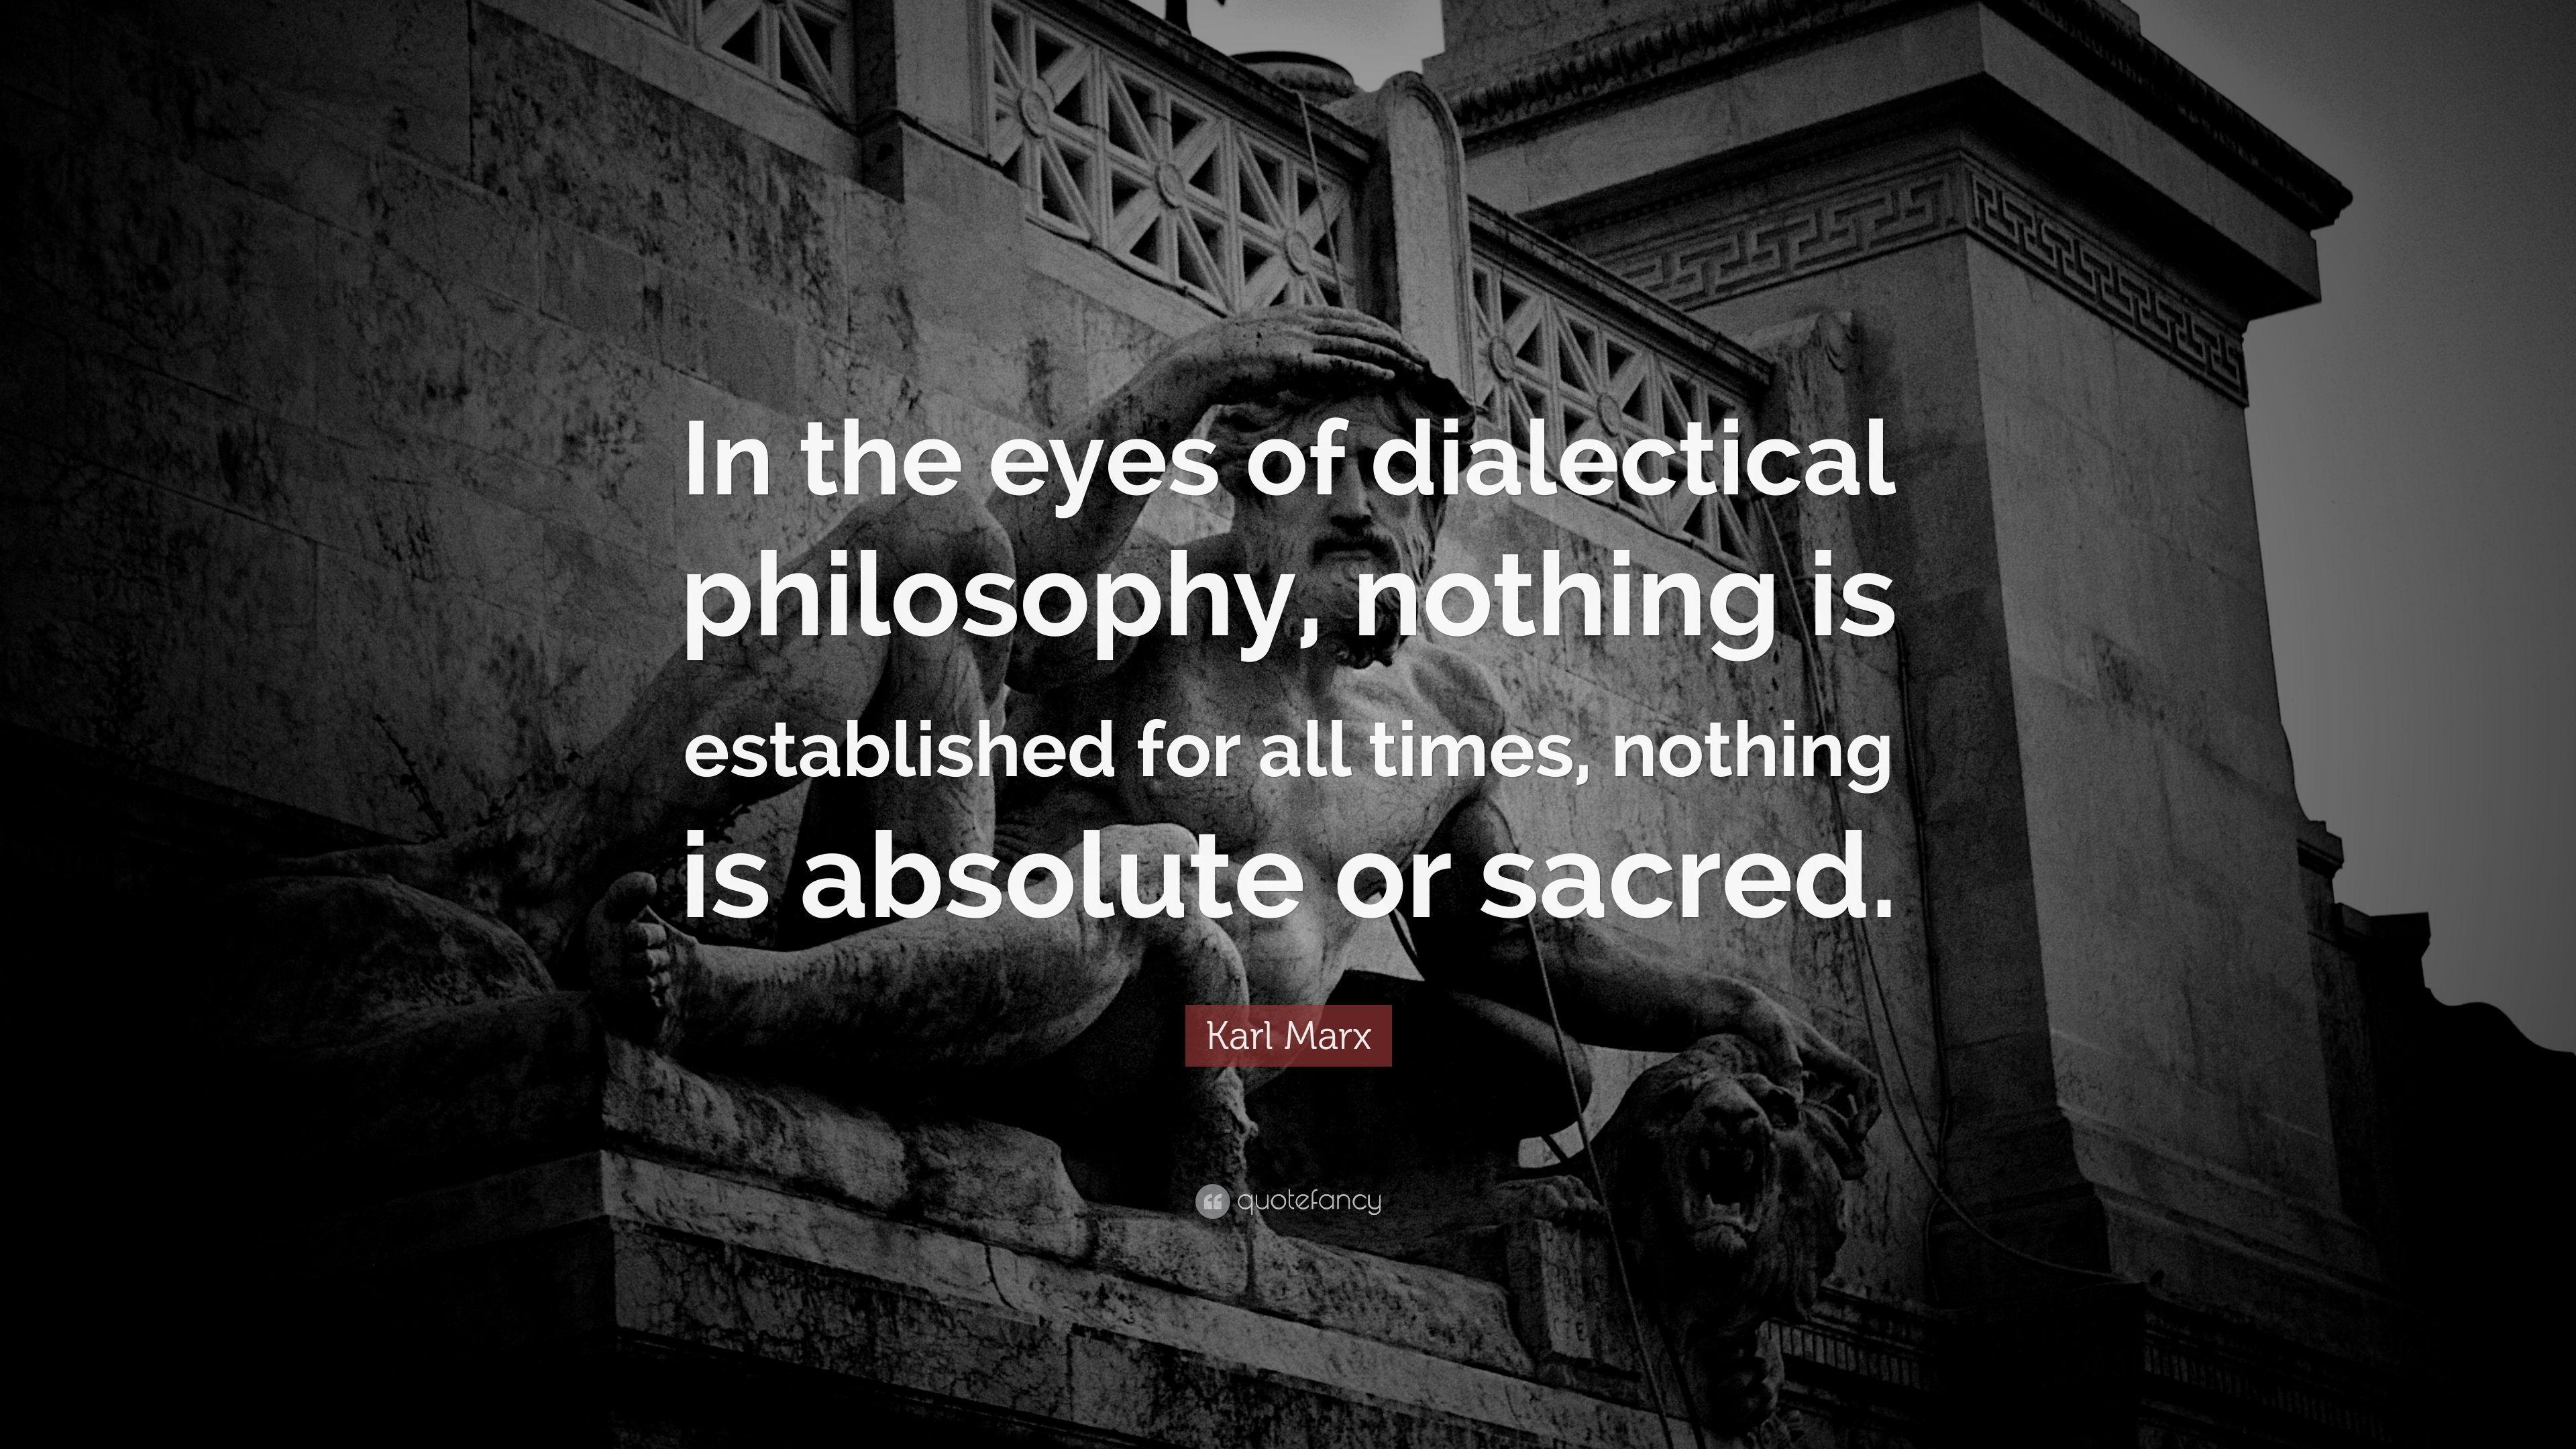 Karl Marx Quote: “In the eyes of dialectical philosophy, nothing